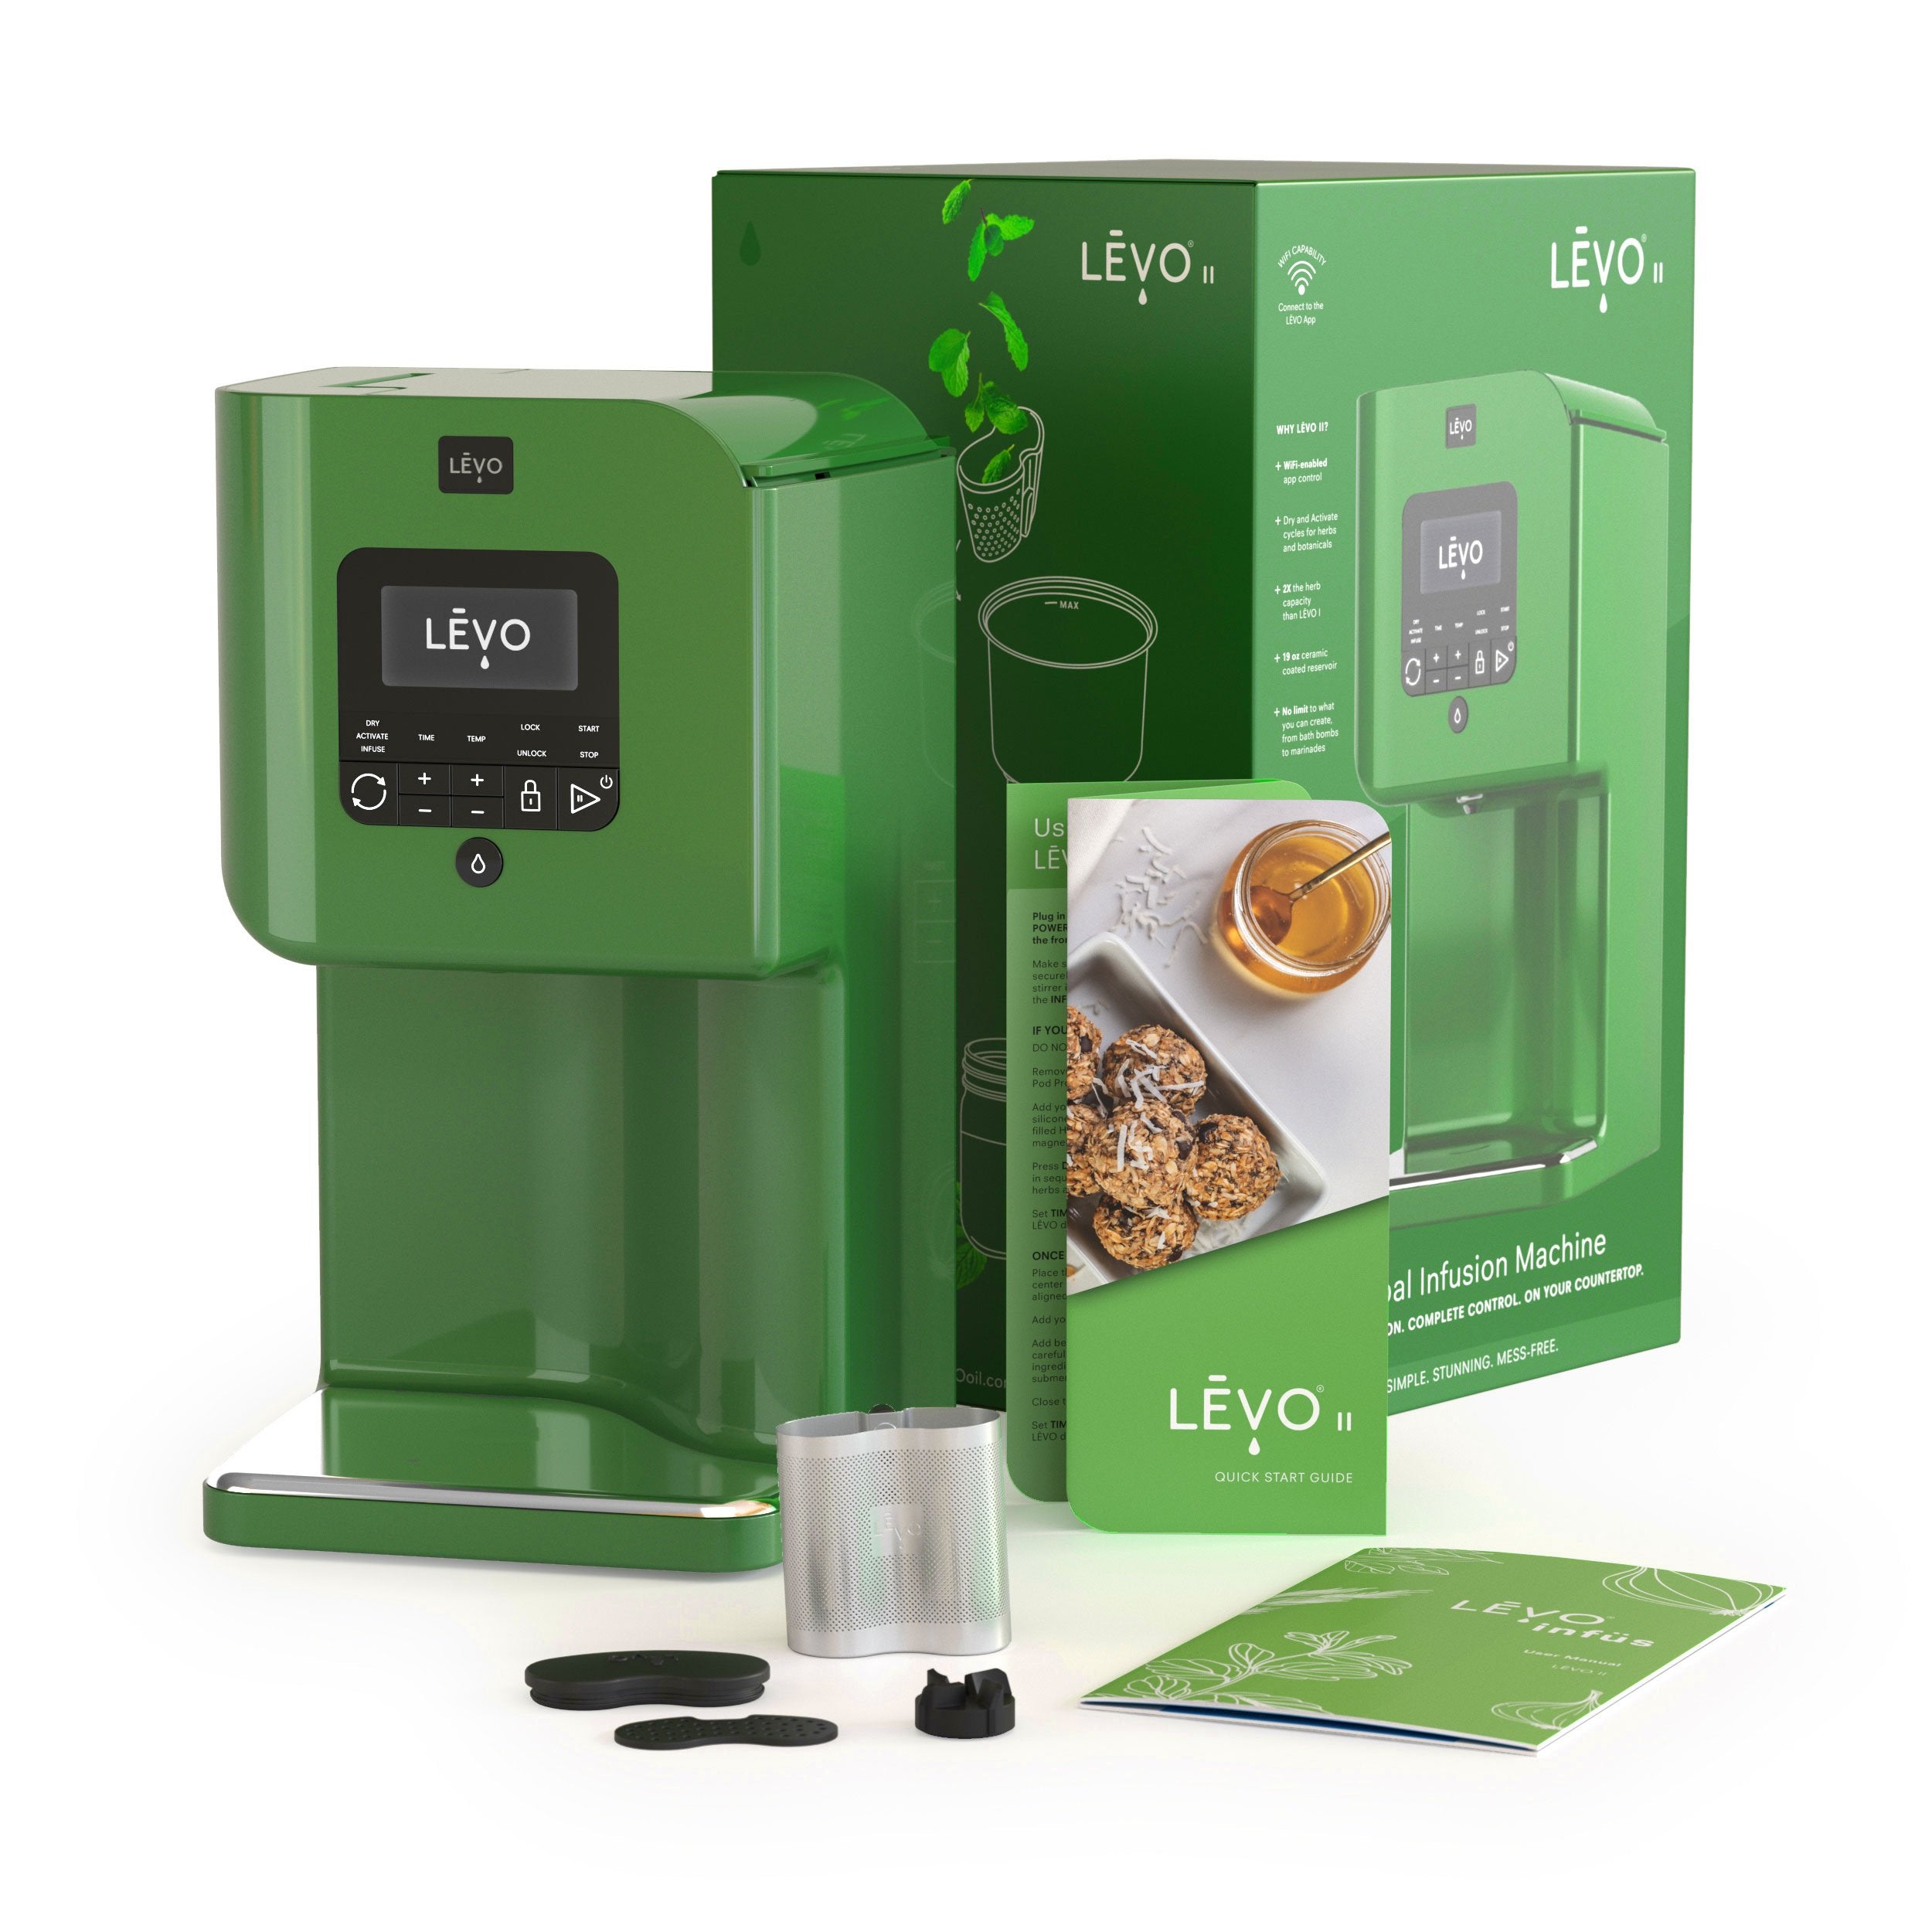 LEVO II comes with everything you need to start infusing right away.